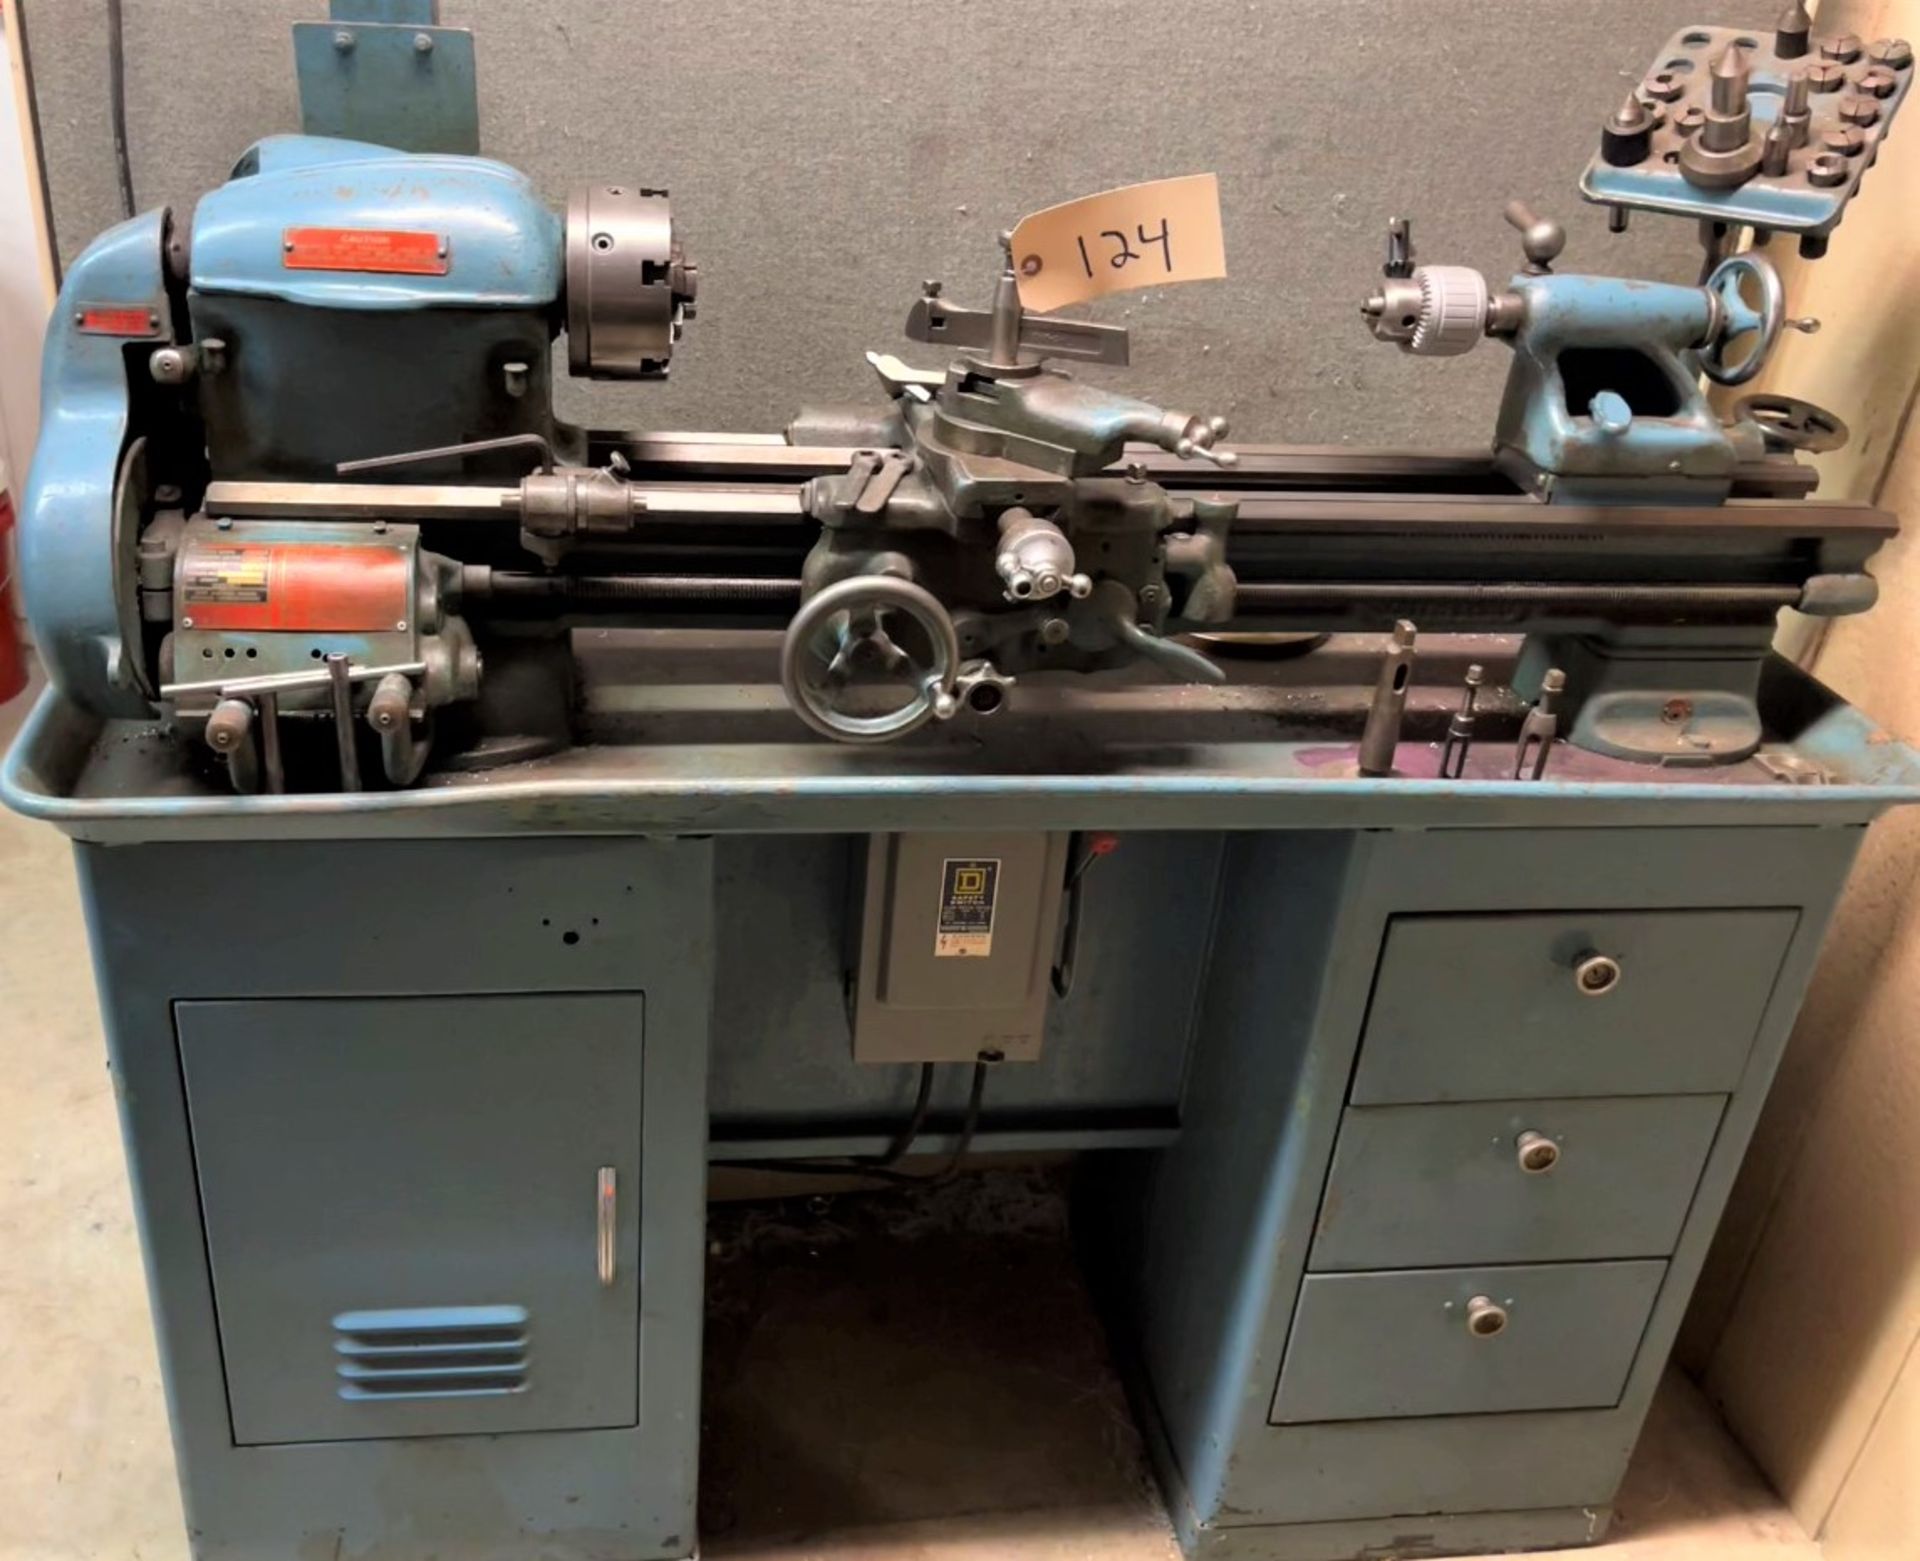 South Bend Mod.A 9"x24" Cabinet Base Lathe - S/N 8202 KKK7, 36" Overall Bed Length, Threading, 3AT